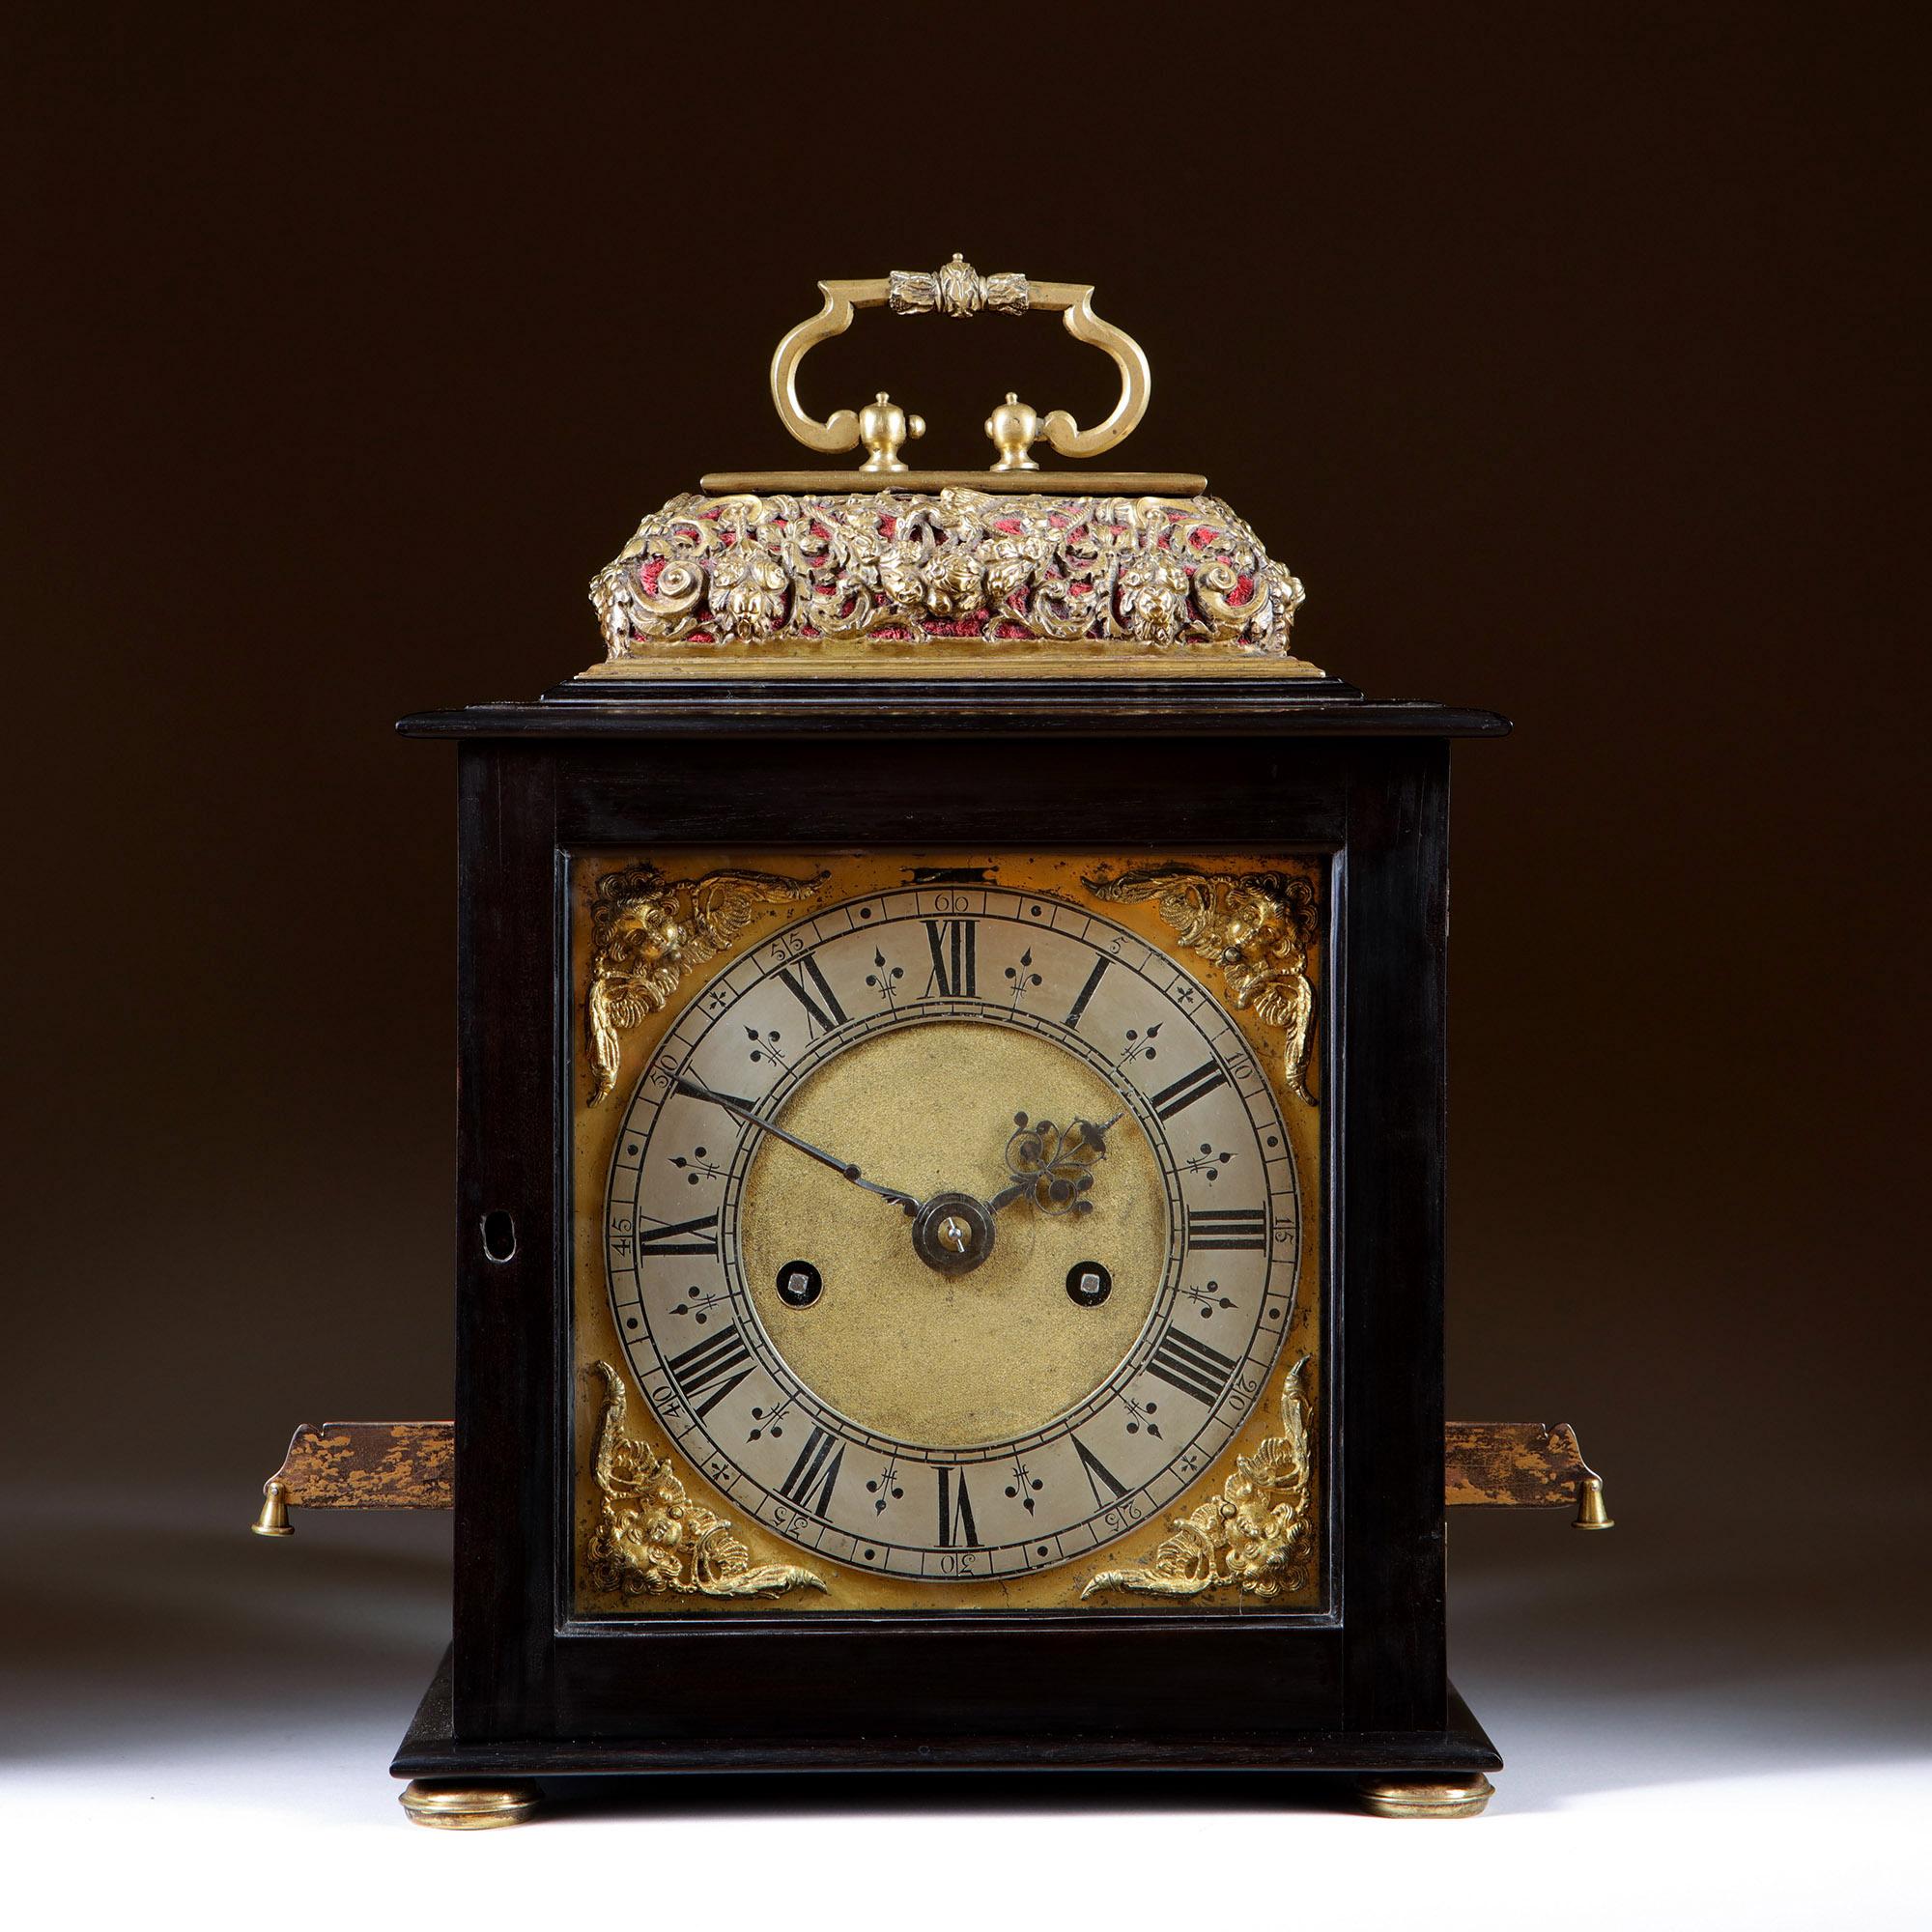 The Rare and Important 17th Century Spring Driven Table Clock by the Celebrated Maker, Henry Jones. 
Provenance dating back to 1745. Owned by Captain Alexander Raitt 

A very rare and unusual Charles II English eight-day spring-driven table clock